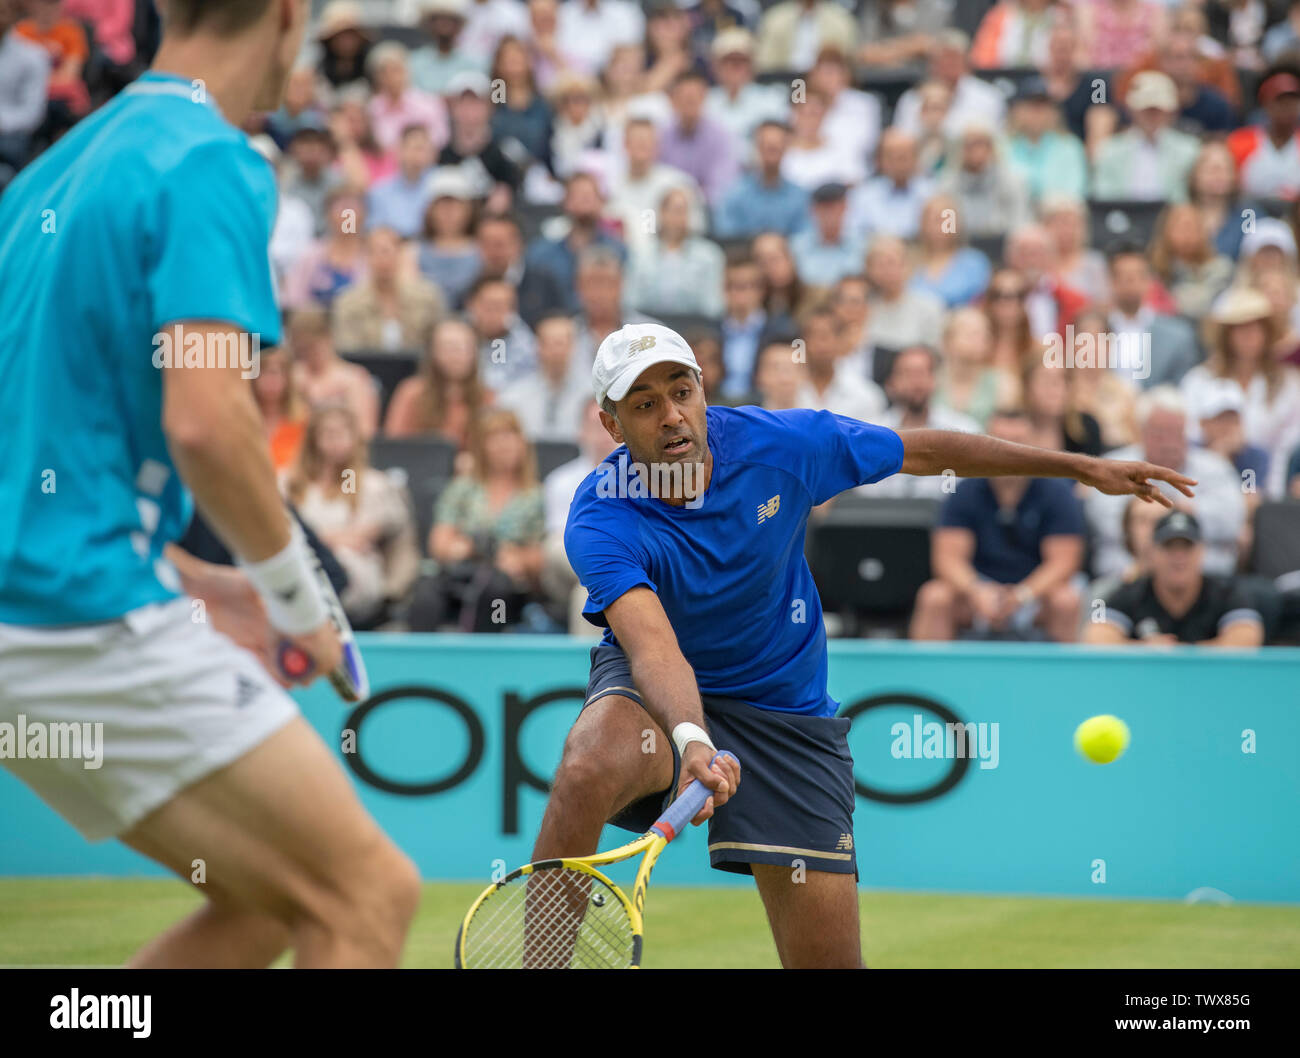 The Queens Club, London, UK. 23rd June 2019. Day 7 of The Fever Tree Championships. Feliciano Lopez (ESP) & Andy Murray (GBR) win the doubles final, beating British player Joe Salisbury and American Rajeev Ram 7-6 (8-6) 5-7 10-5. Credit: Malcolm Park/Alamy Live News. Stock Photo